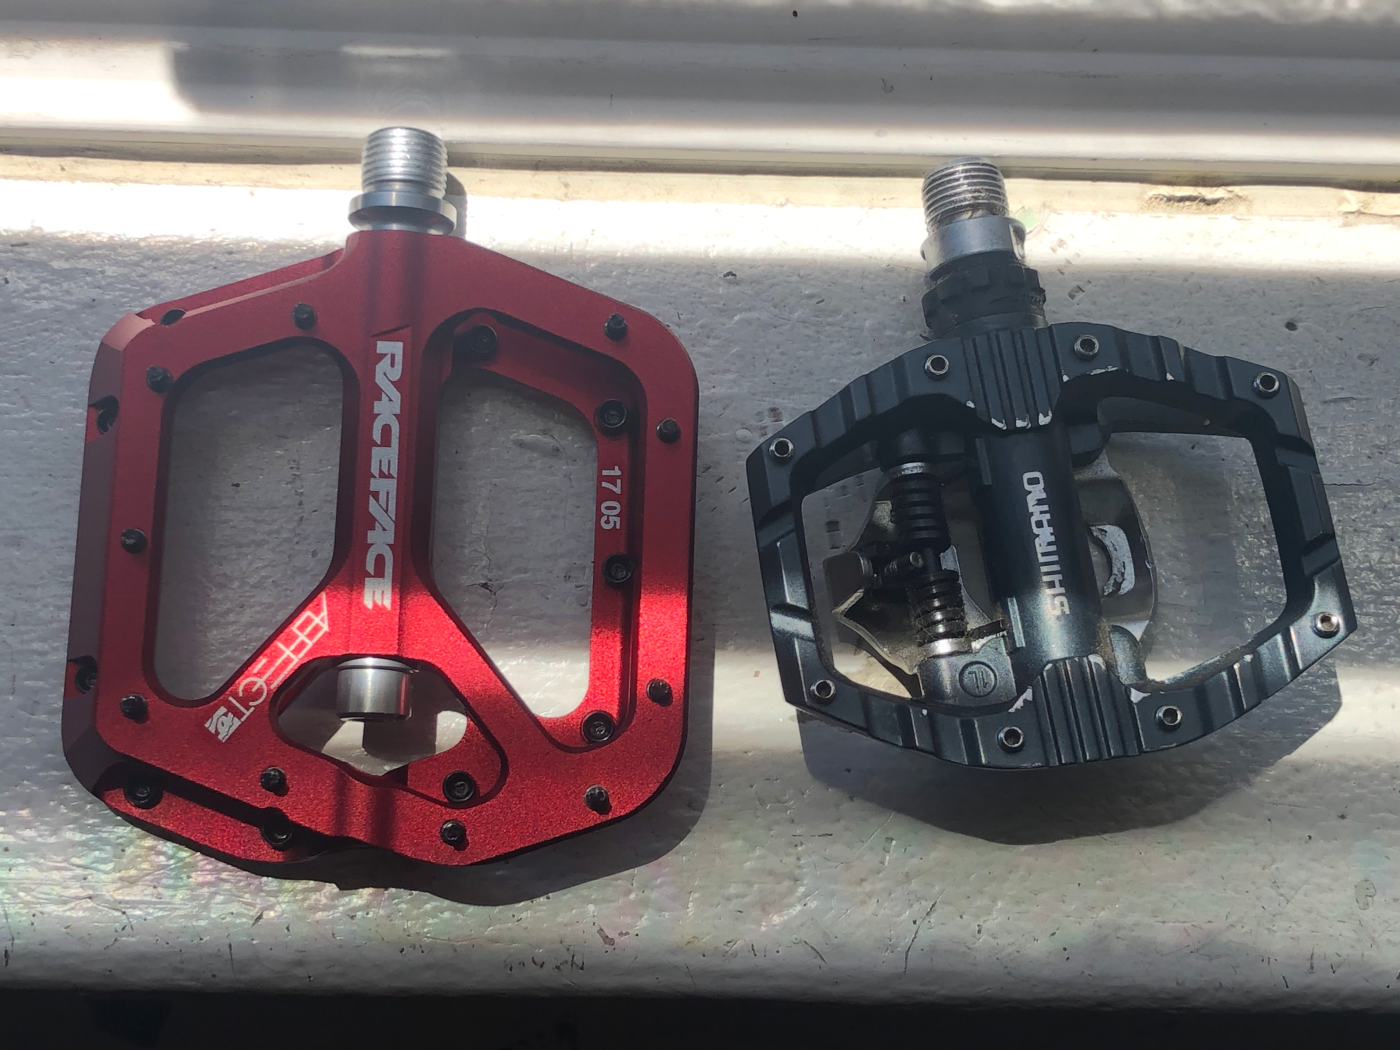 Shimano PD-EH500 Dual Side Pedals - Thoughts? - Bike Forums